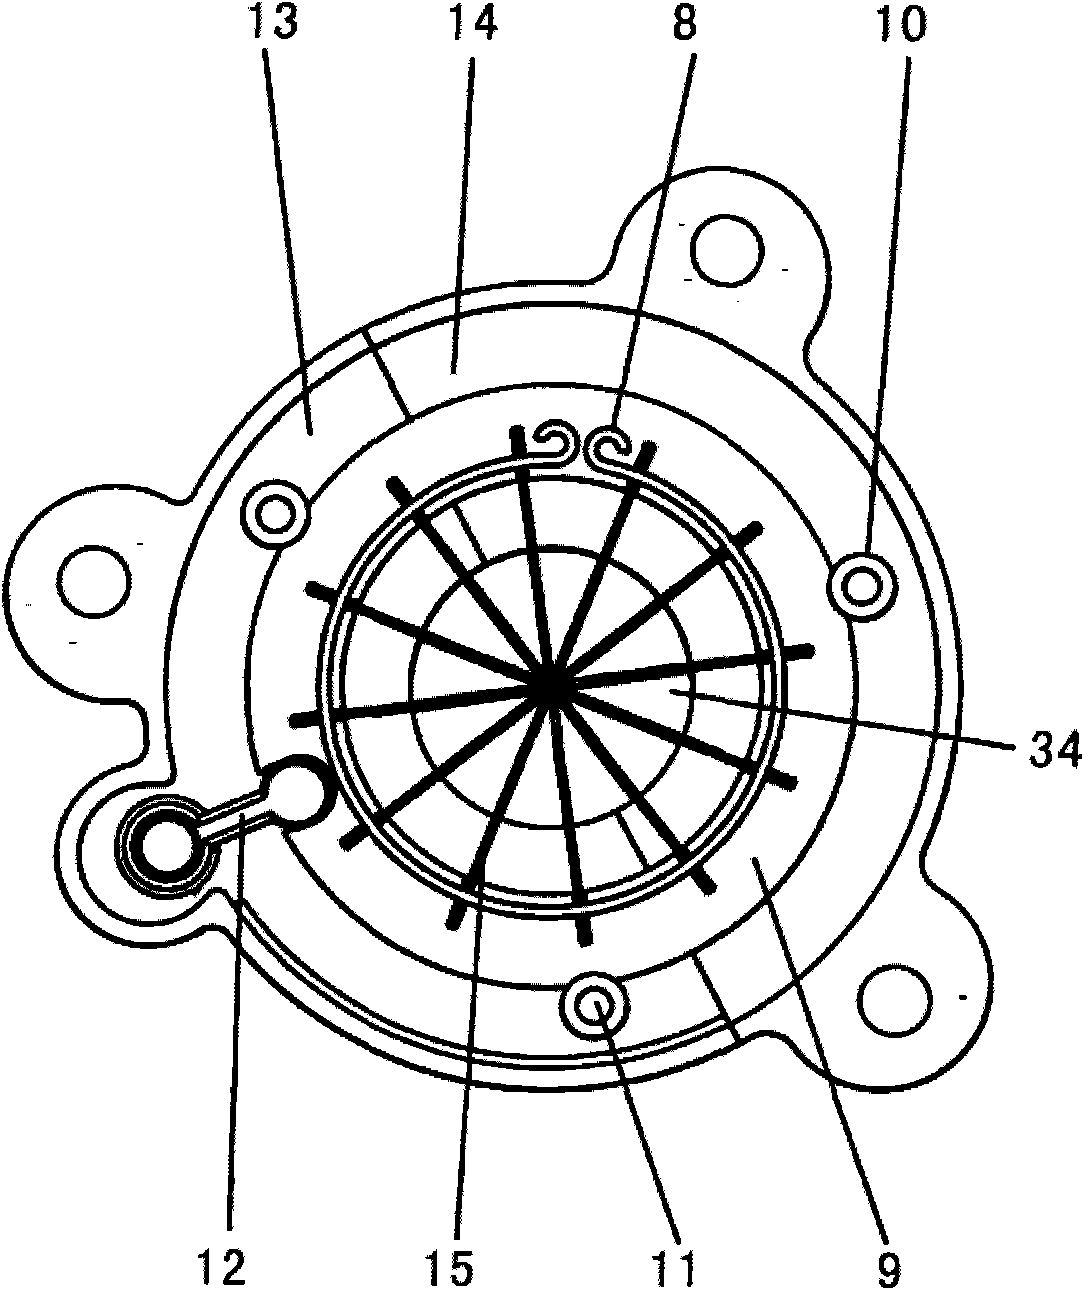 Variable air inlet turbocharger structure